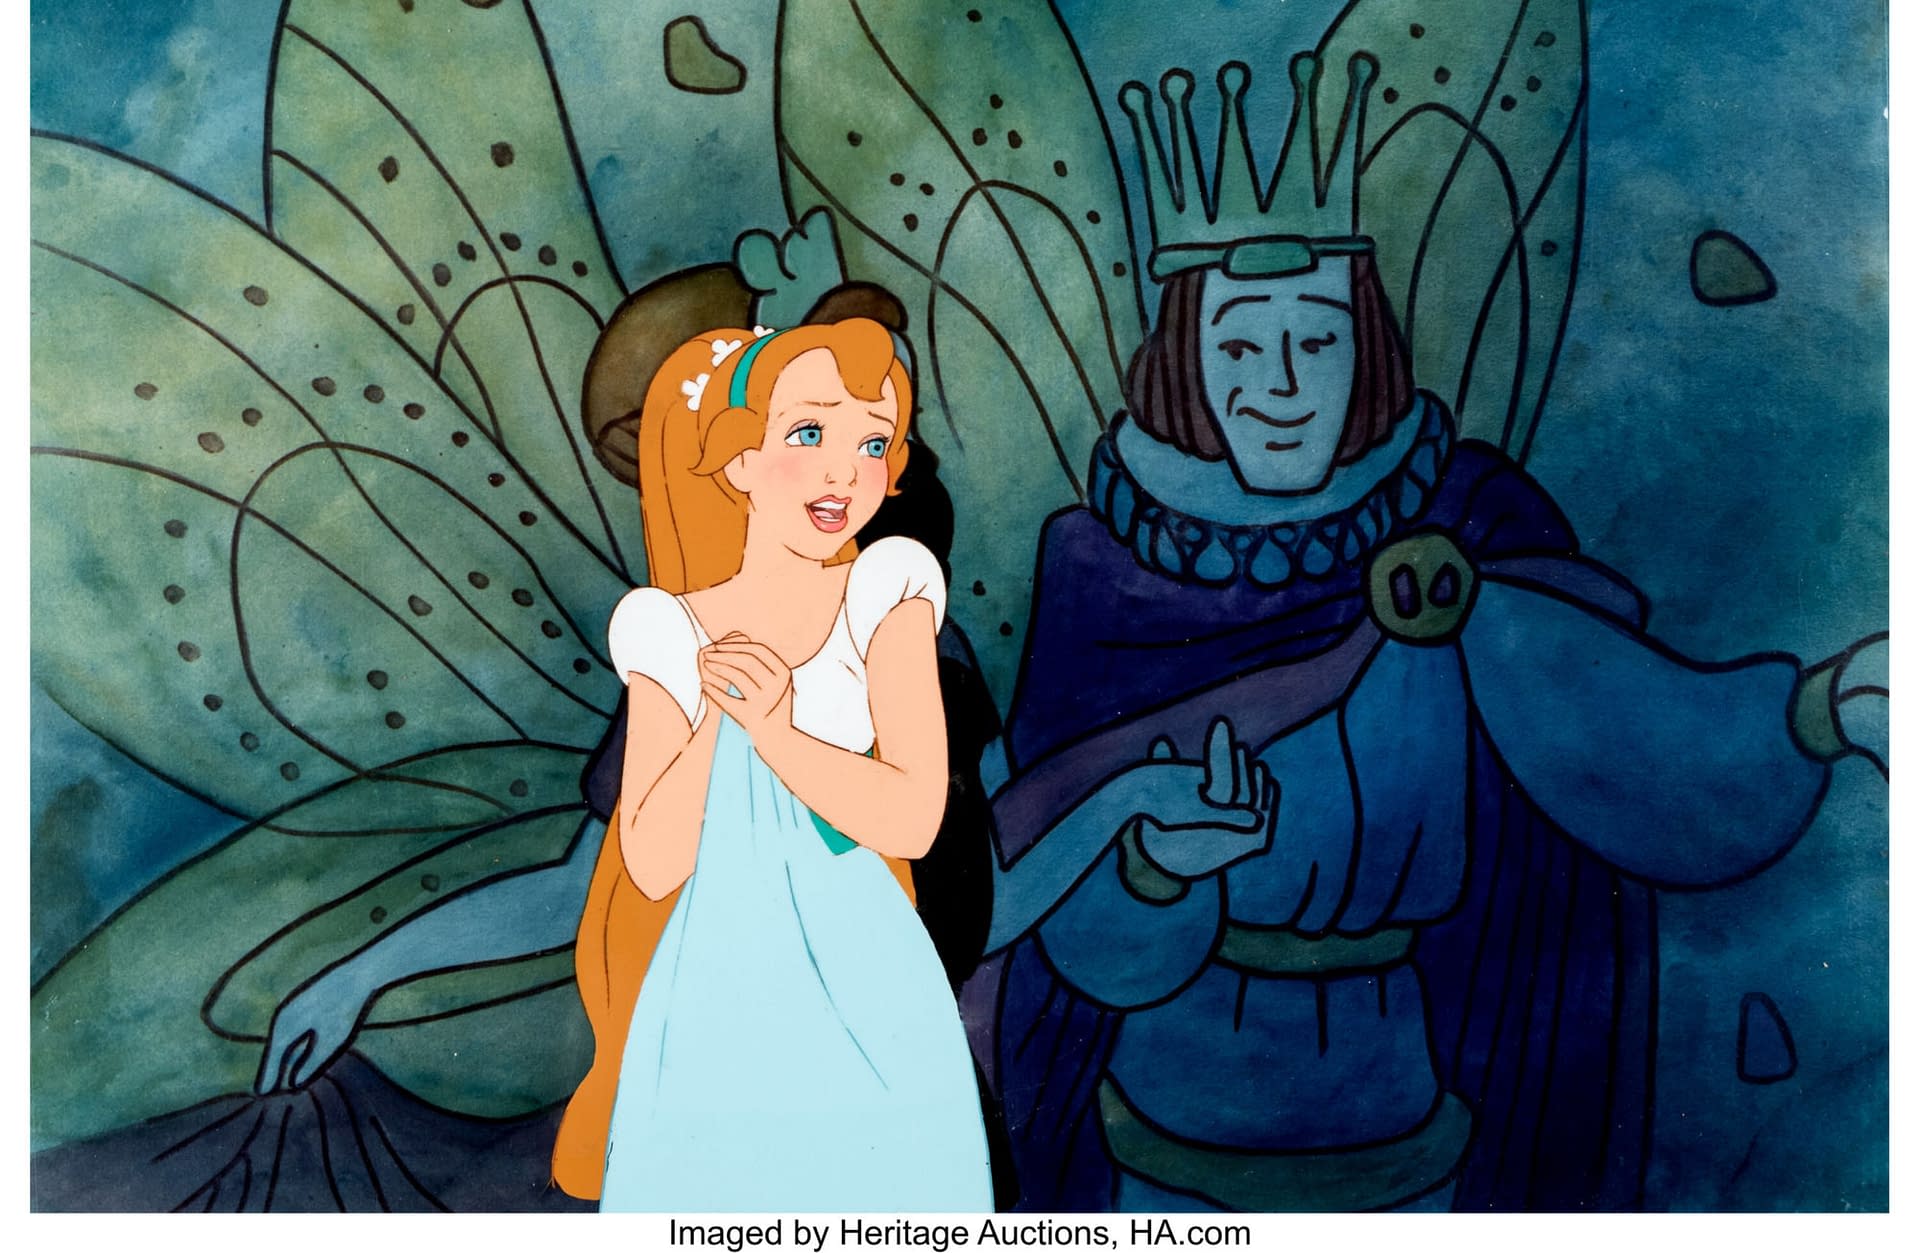 Don Bluth's Thumbelina Production Cel Up For Auction